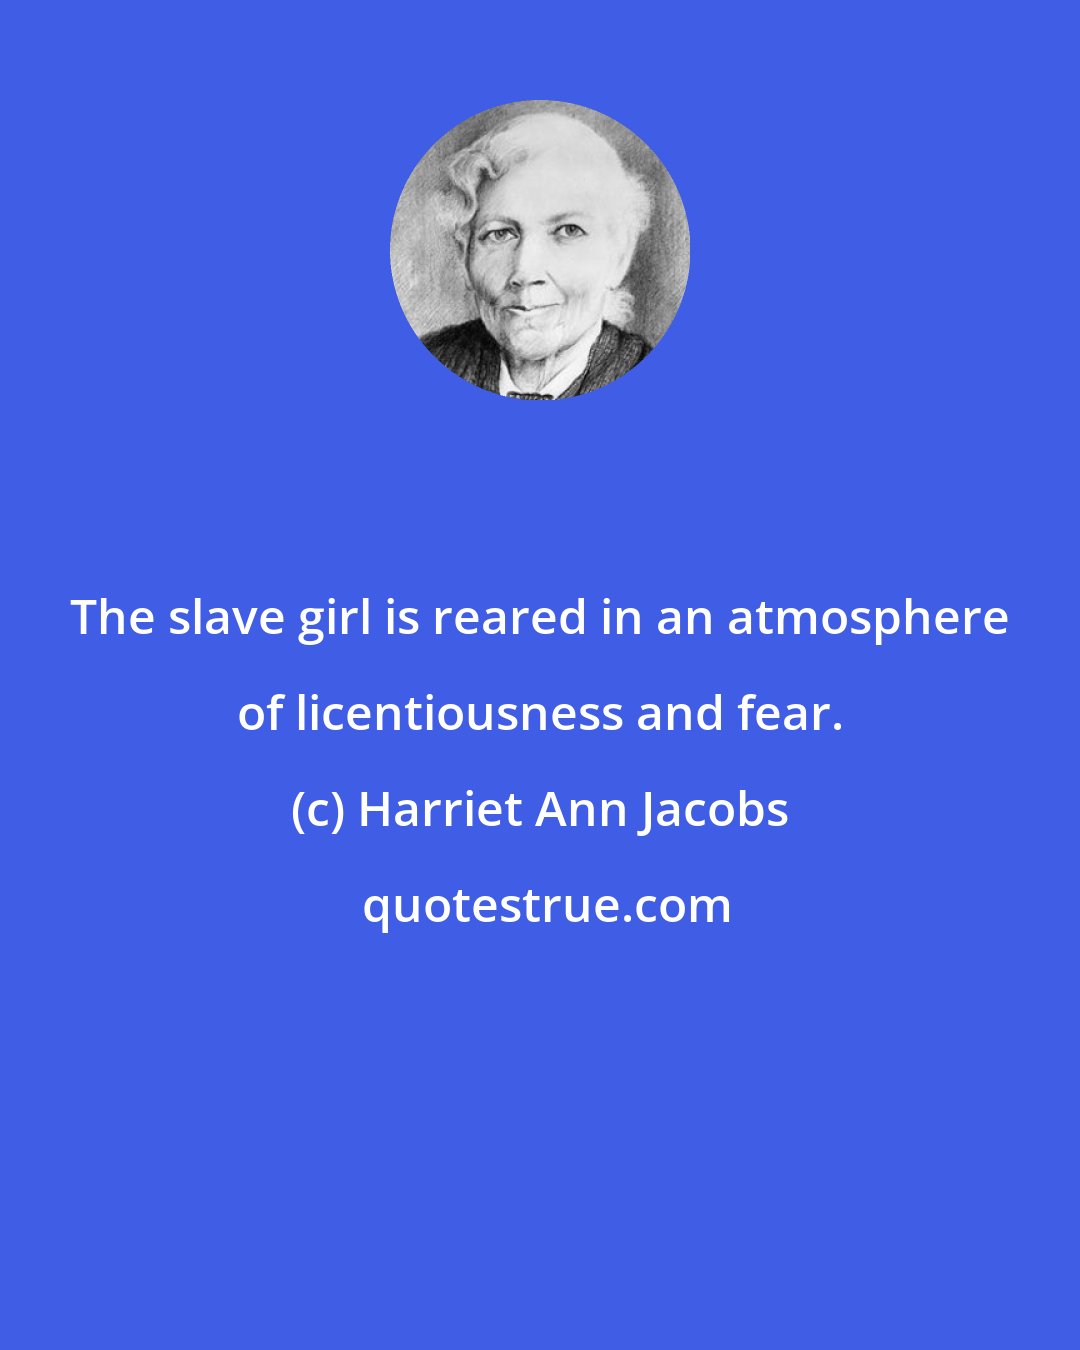 Harriet Ann Jacobs: The slave girl is reared in an atmosphere of licentiousness and fear.